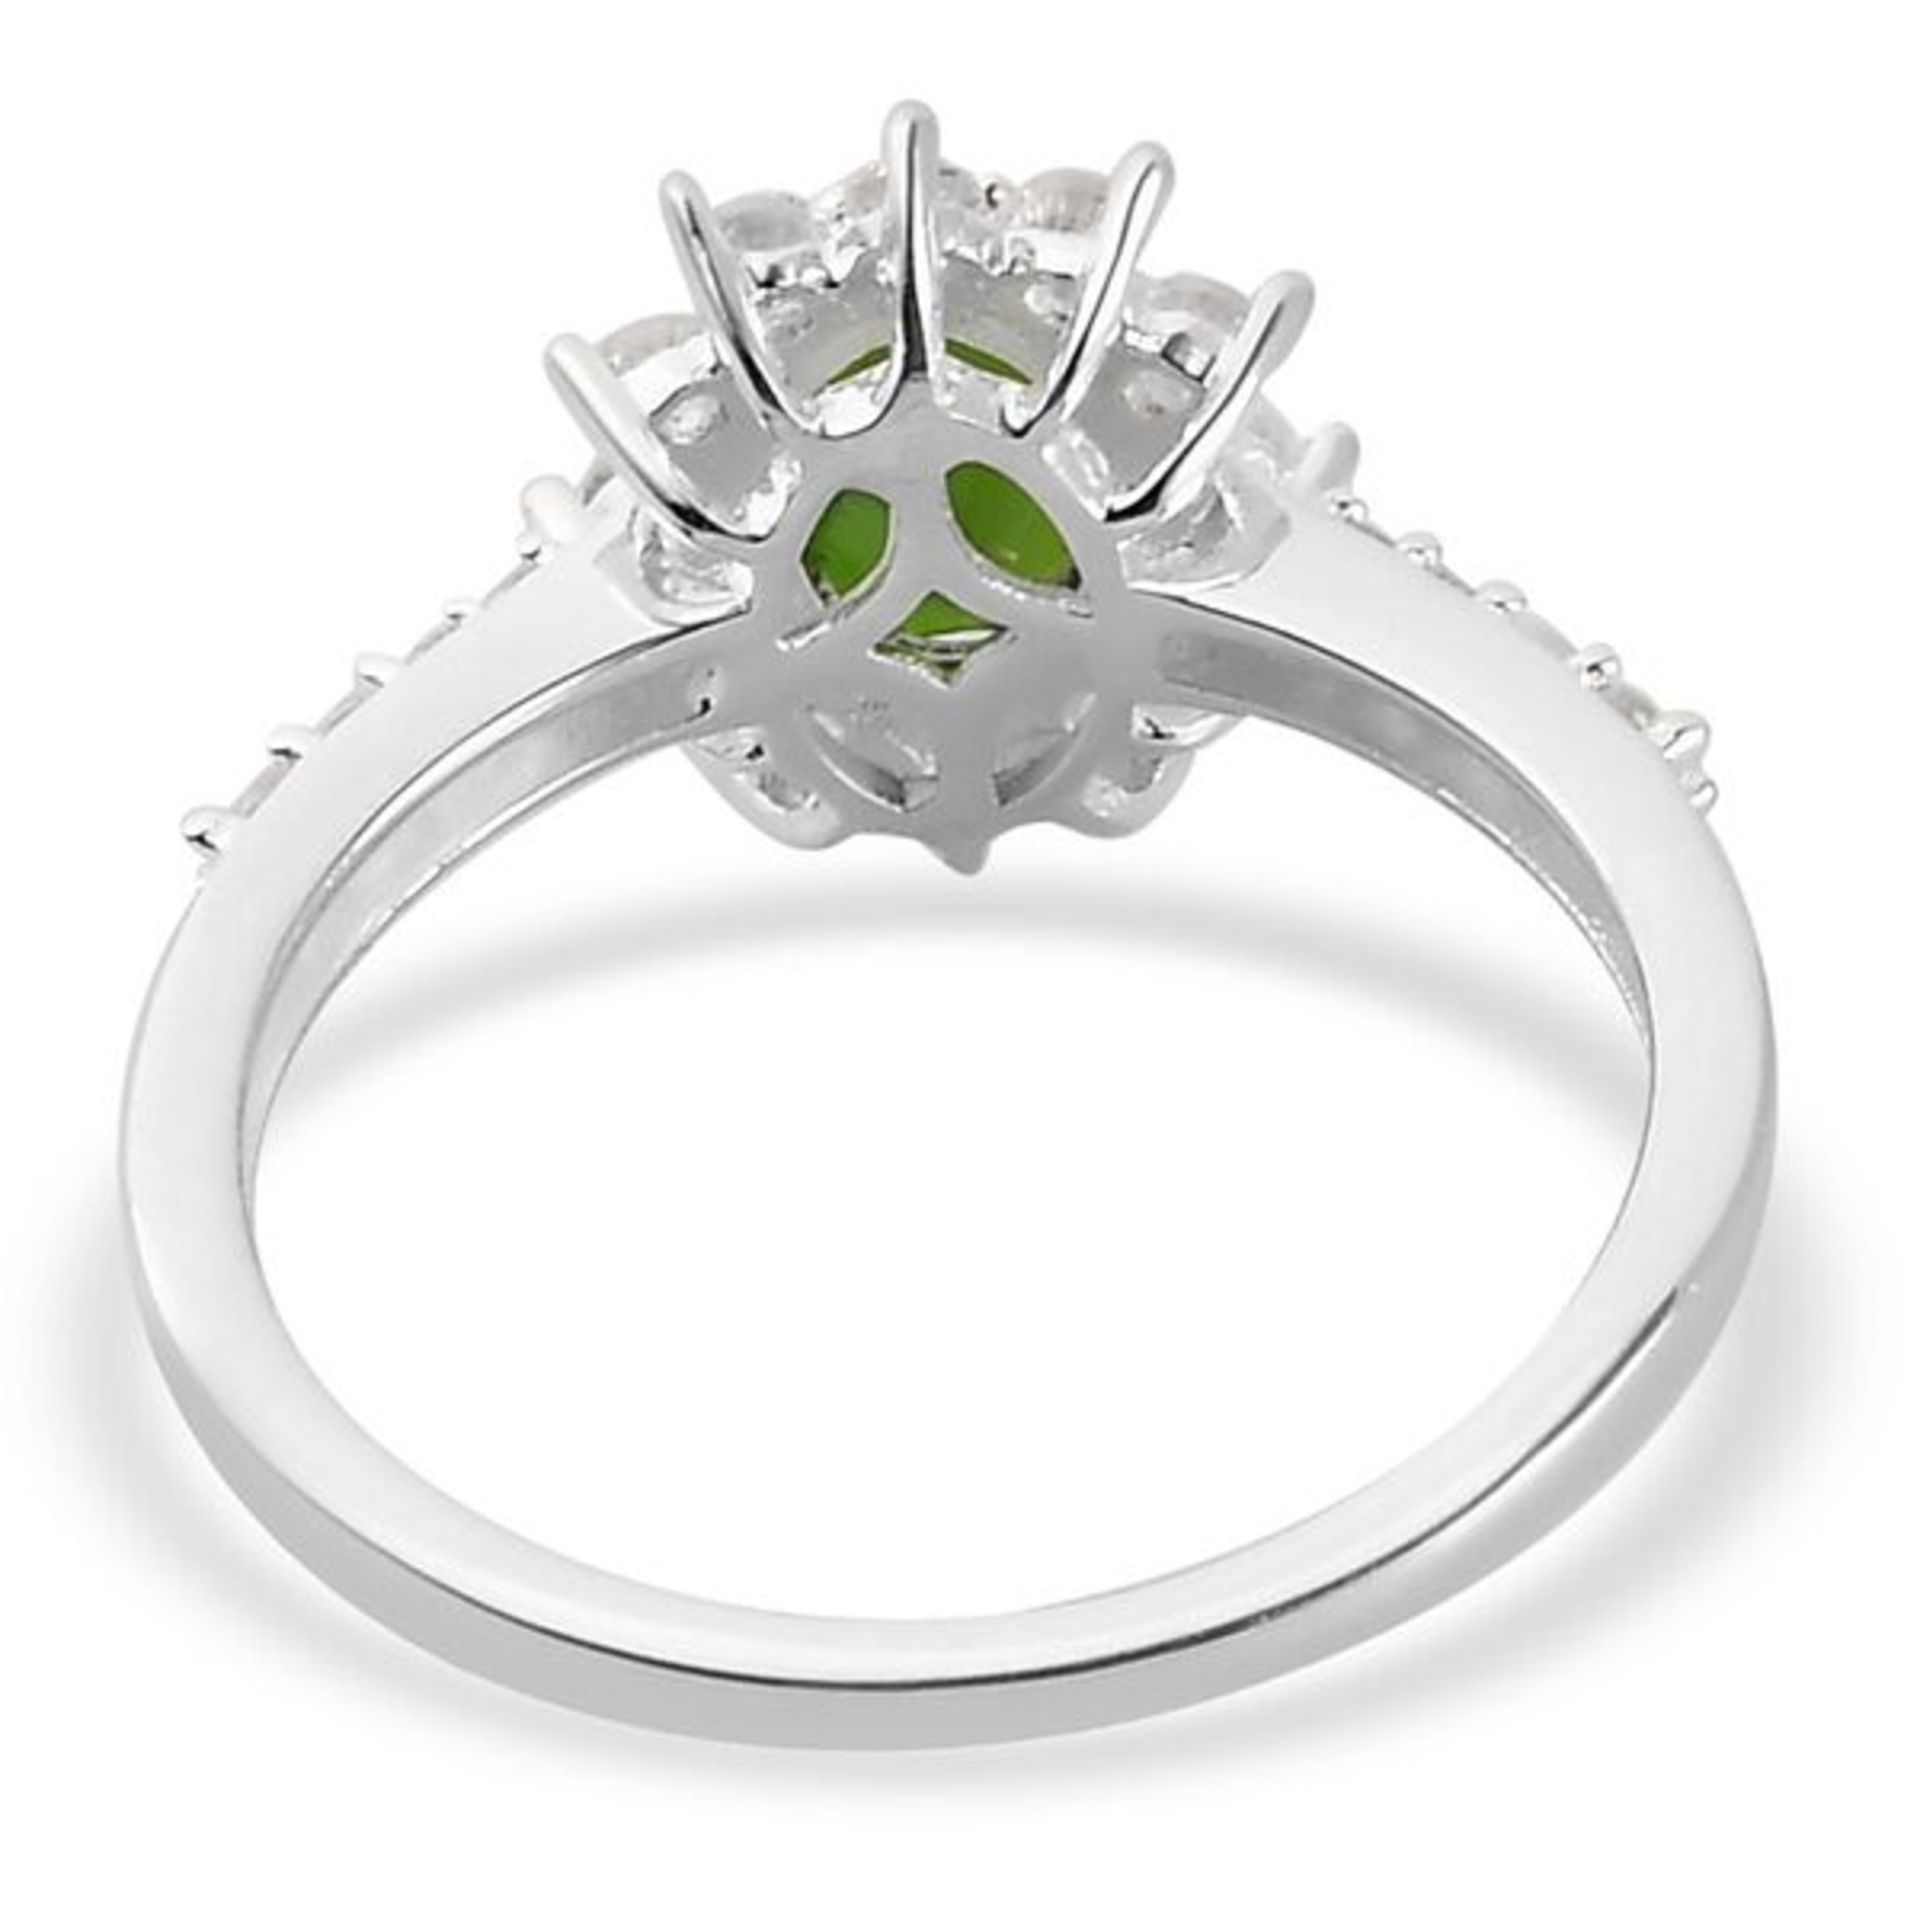 NEW!! Sterling Silver Diopside and Natural Cambodian Zircon Ring & Earrings - Image 5 of 6